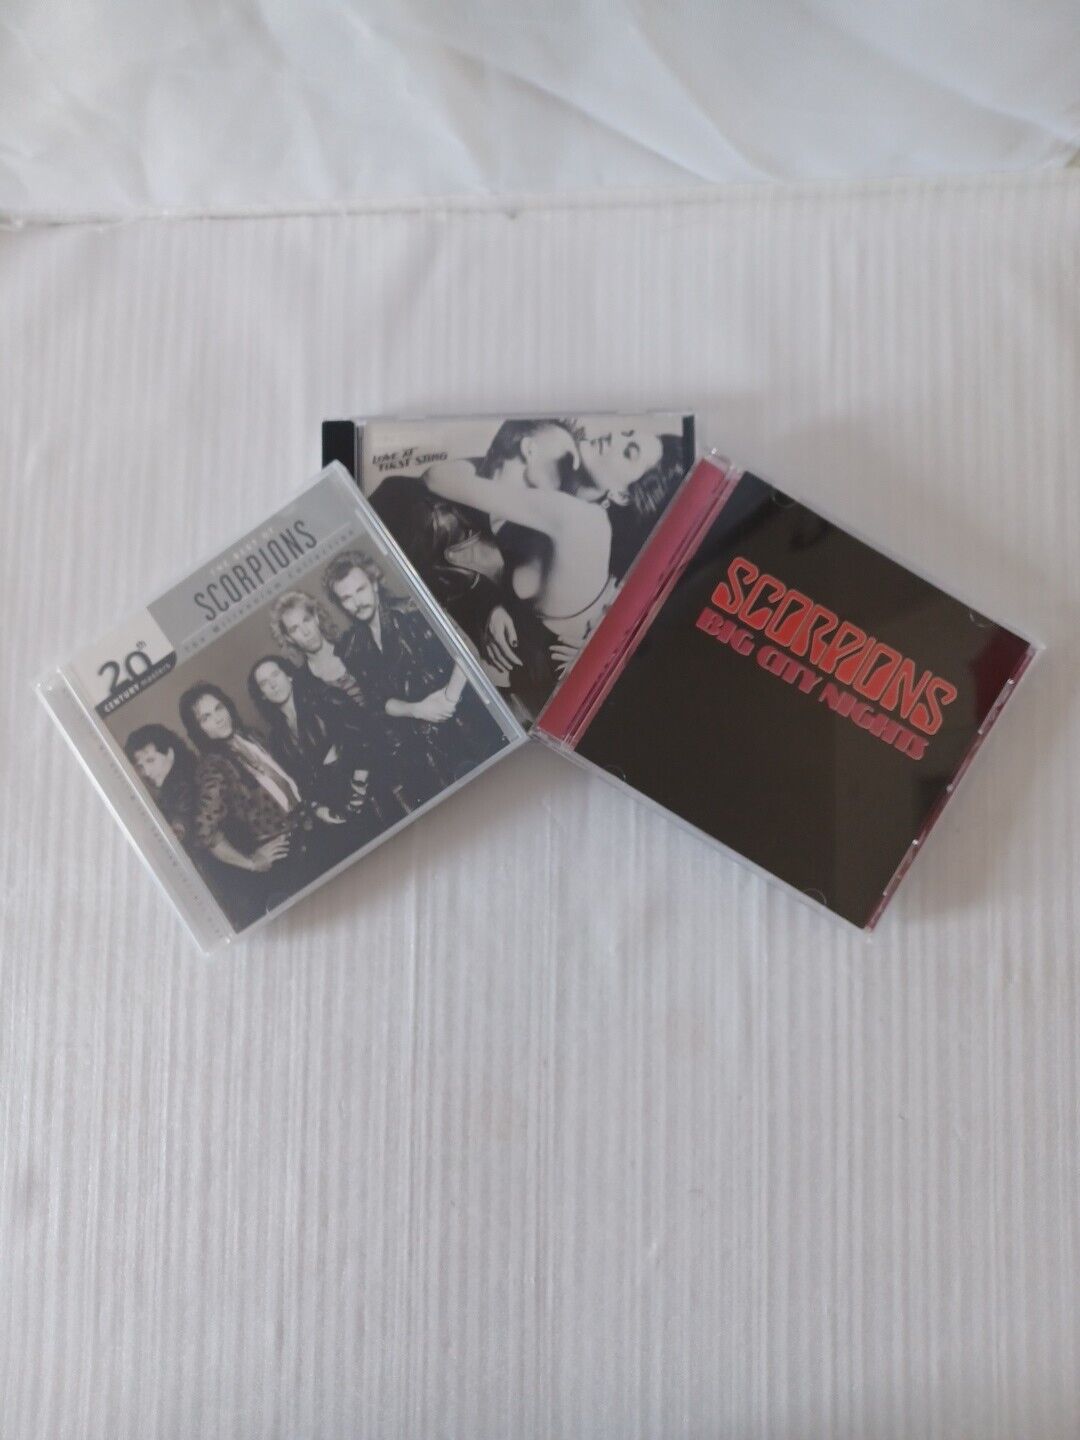 Vintage, Scorpions: 3 CD Collection. Excellent Near Mint Condition. 